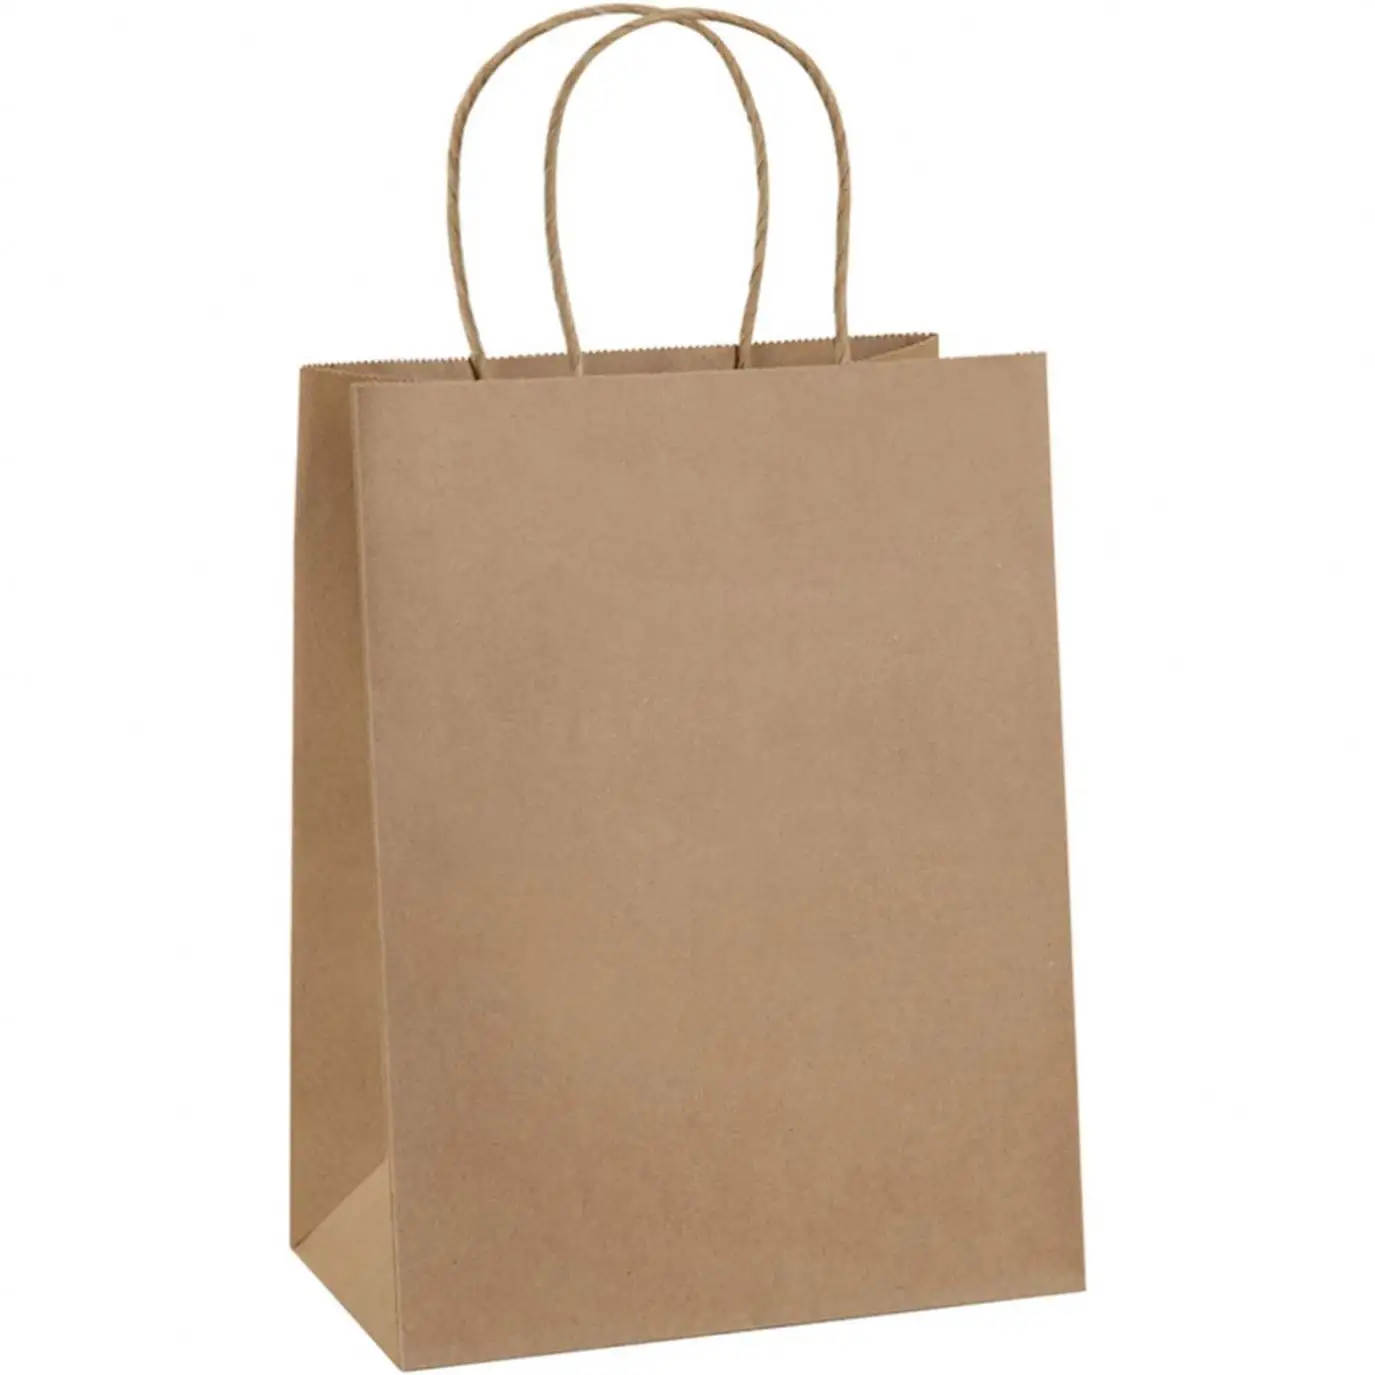 Customized Printing Logo Company Enterprise Packaging Carrying Wine Gift Bags Claret Kraft Paper Bags with Rope Handles